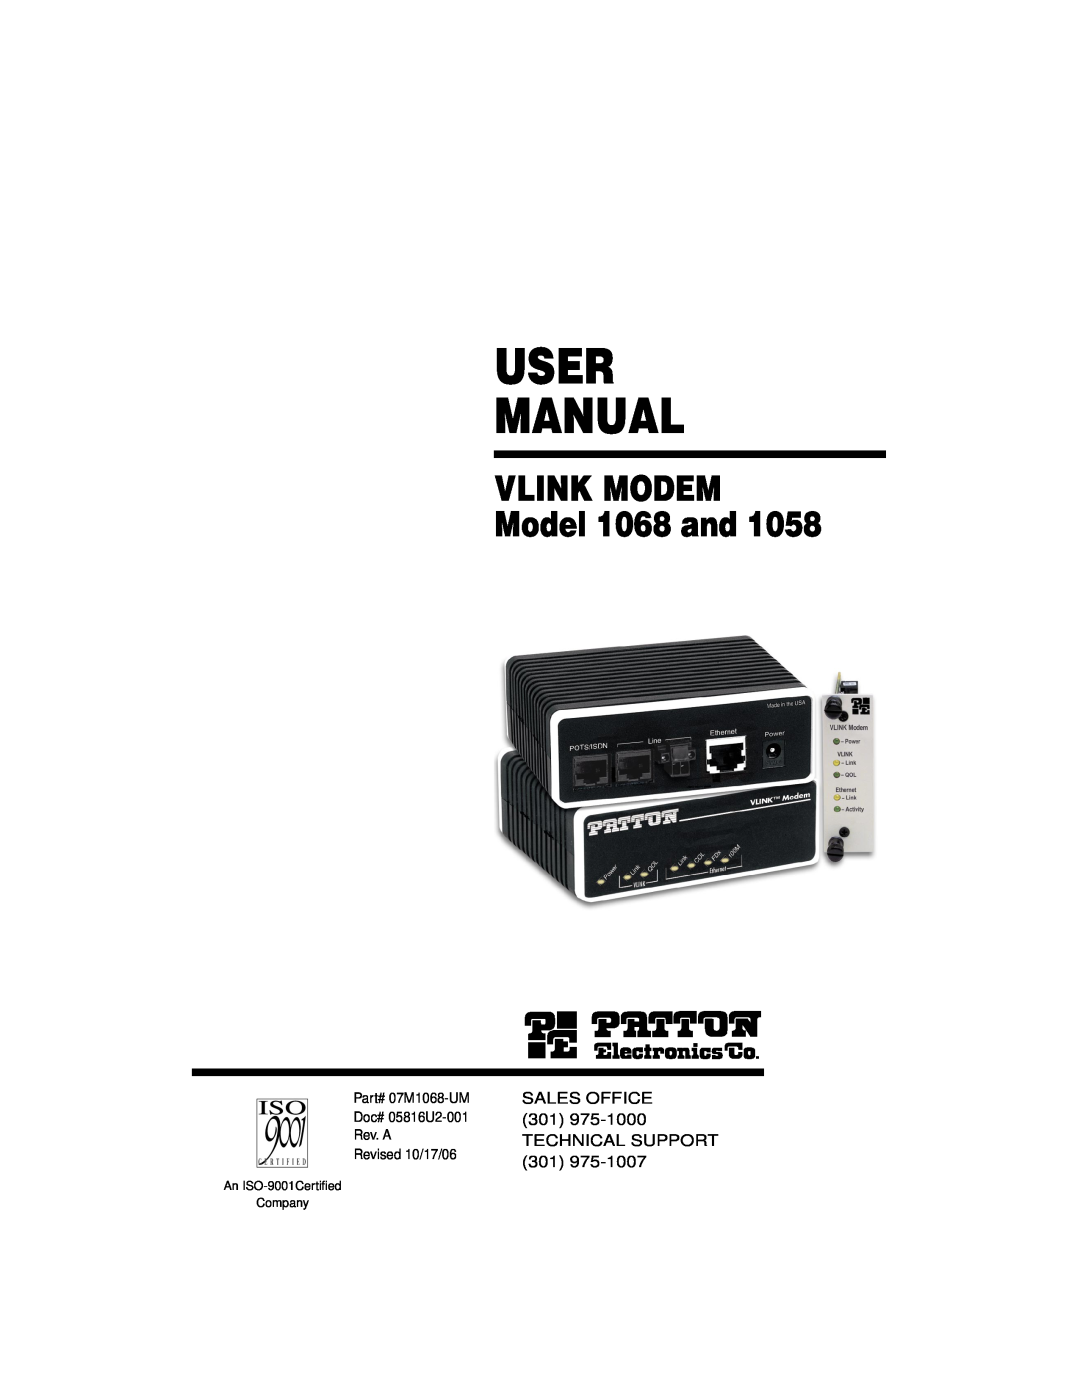 Patton electronic user manual User Manual, VLINK MODEM Model 1068 and, An ISO-9001Certiﬁed Company 